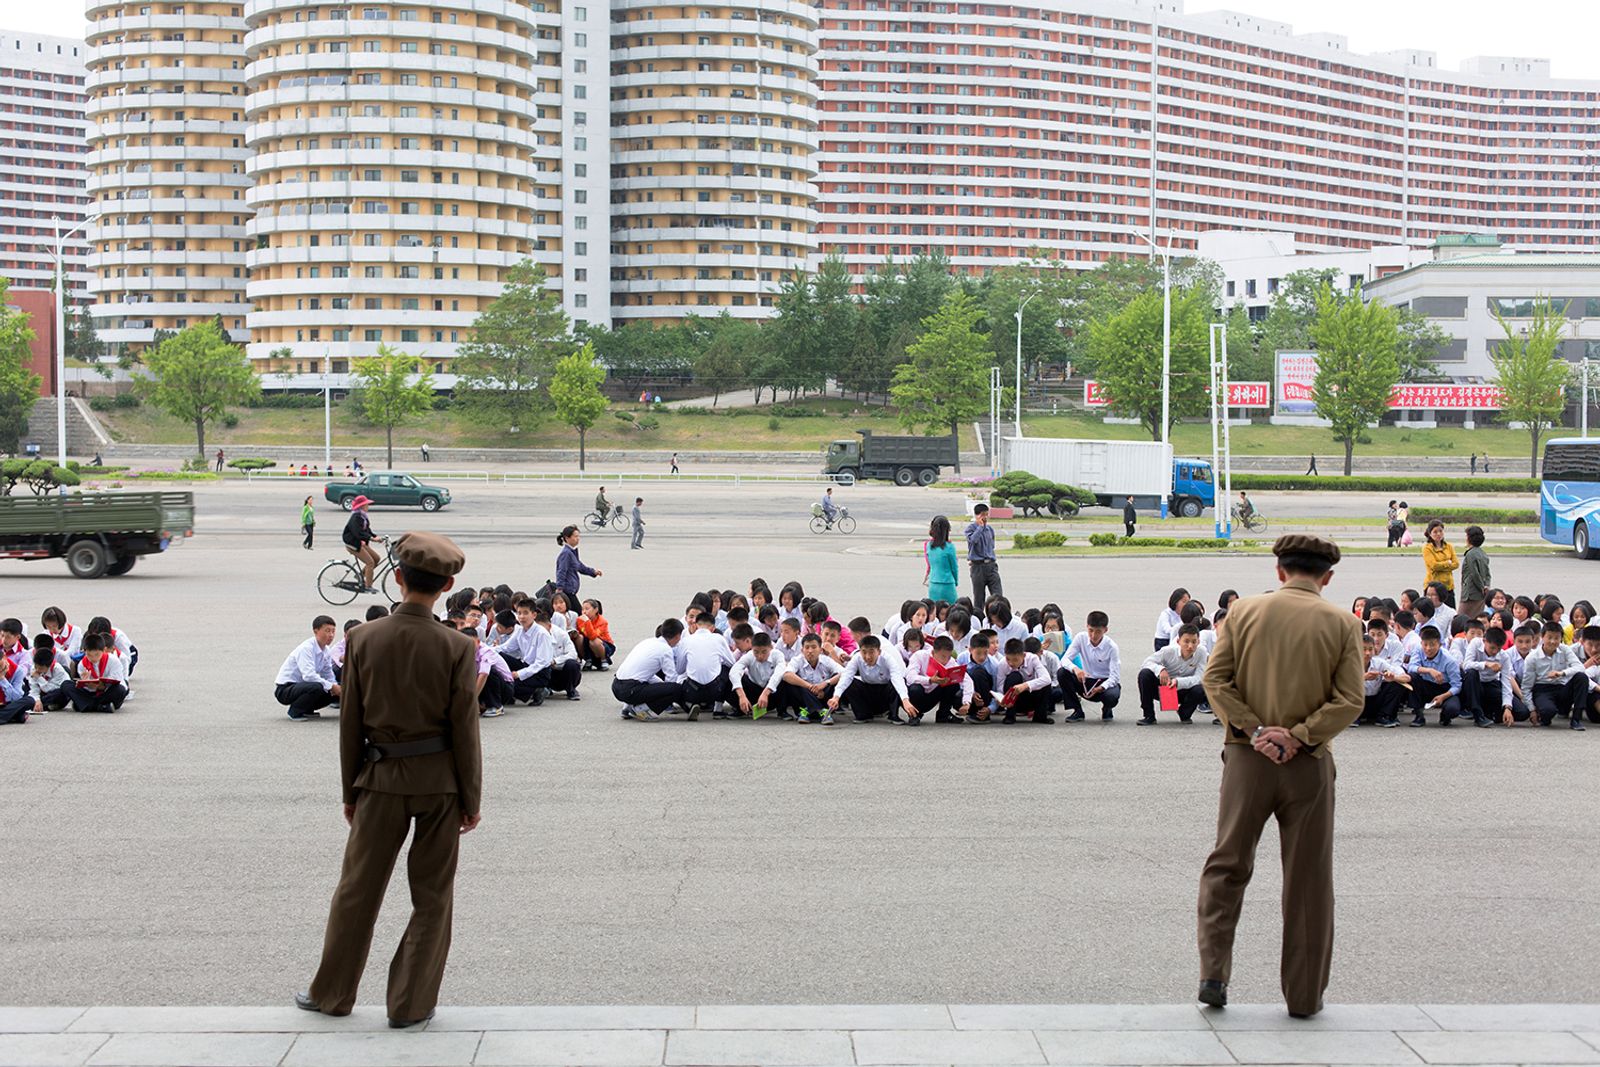 © Filippo Venturi - Korean students while studying in the Pyongyang Circus Square, as they wait for the show to begin.